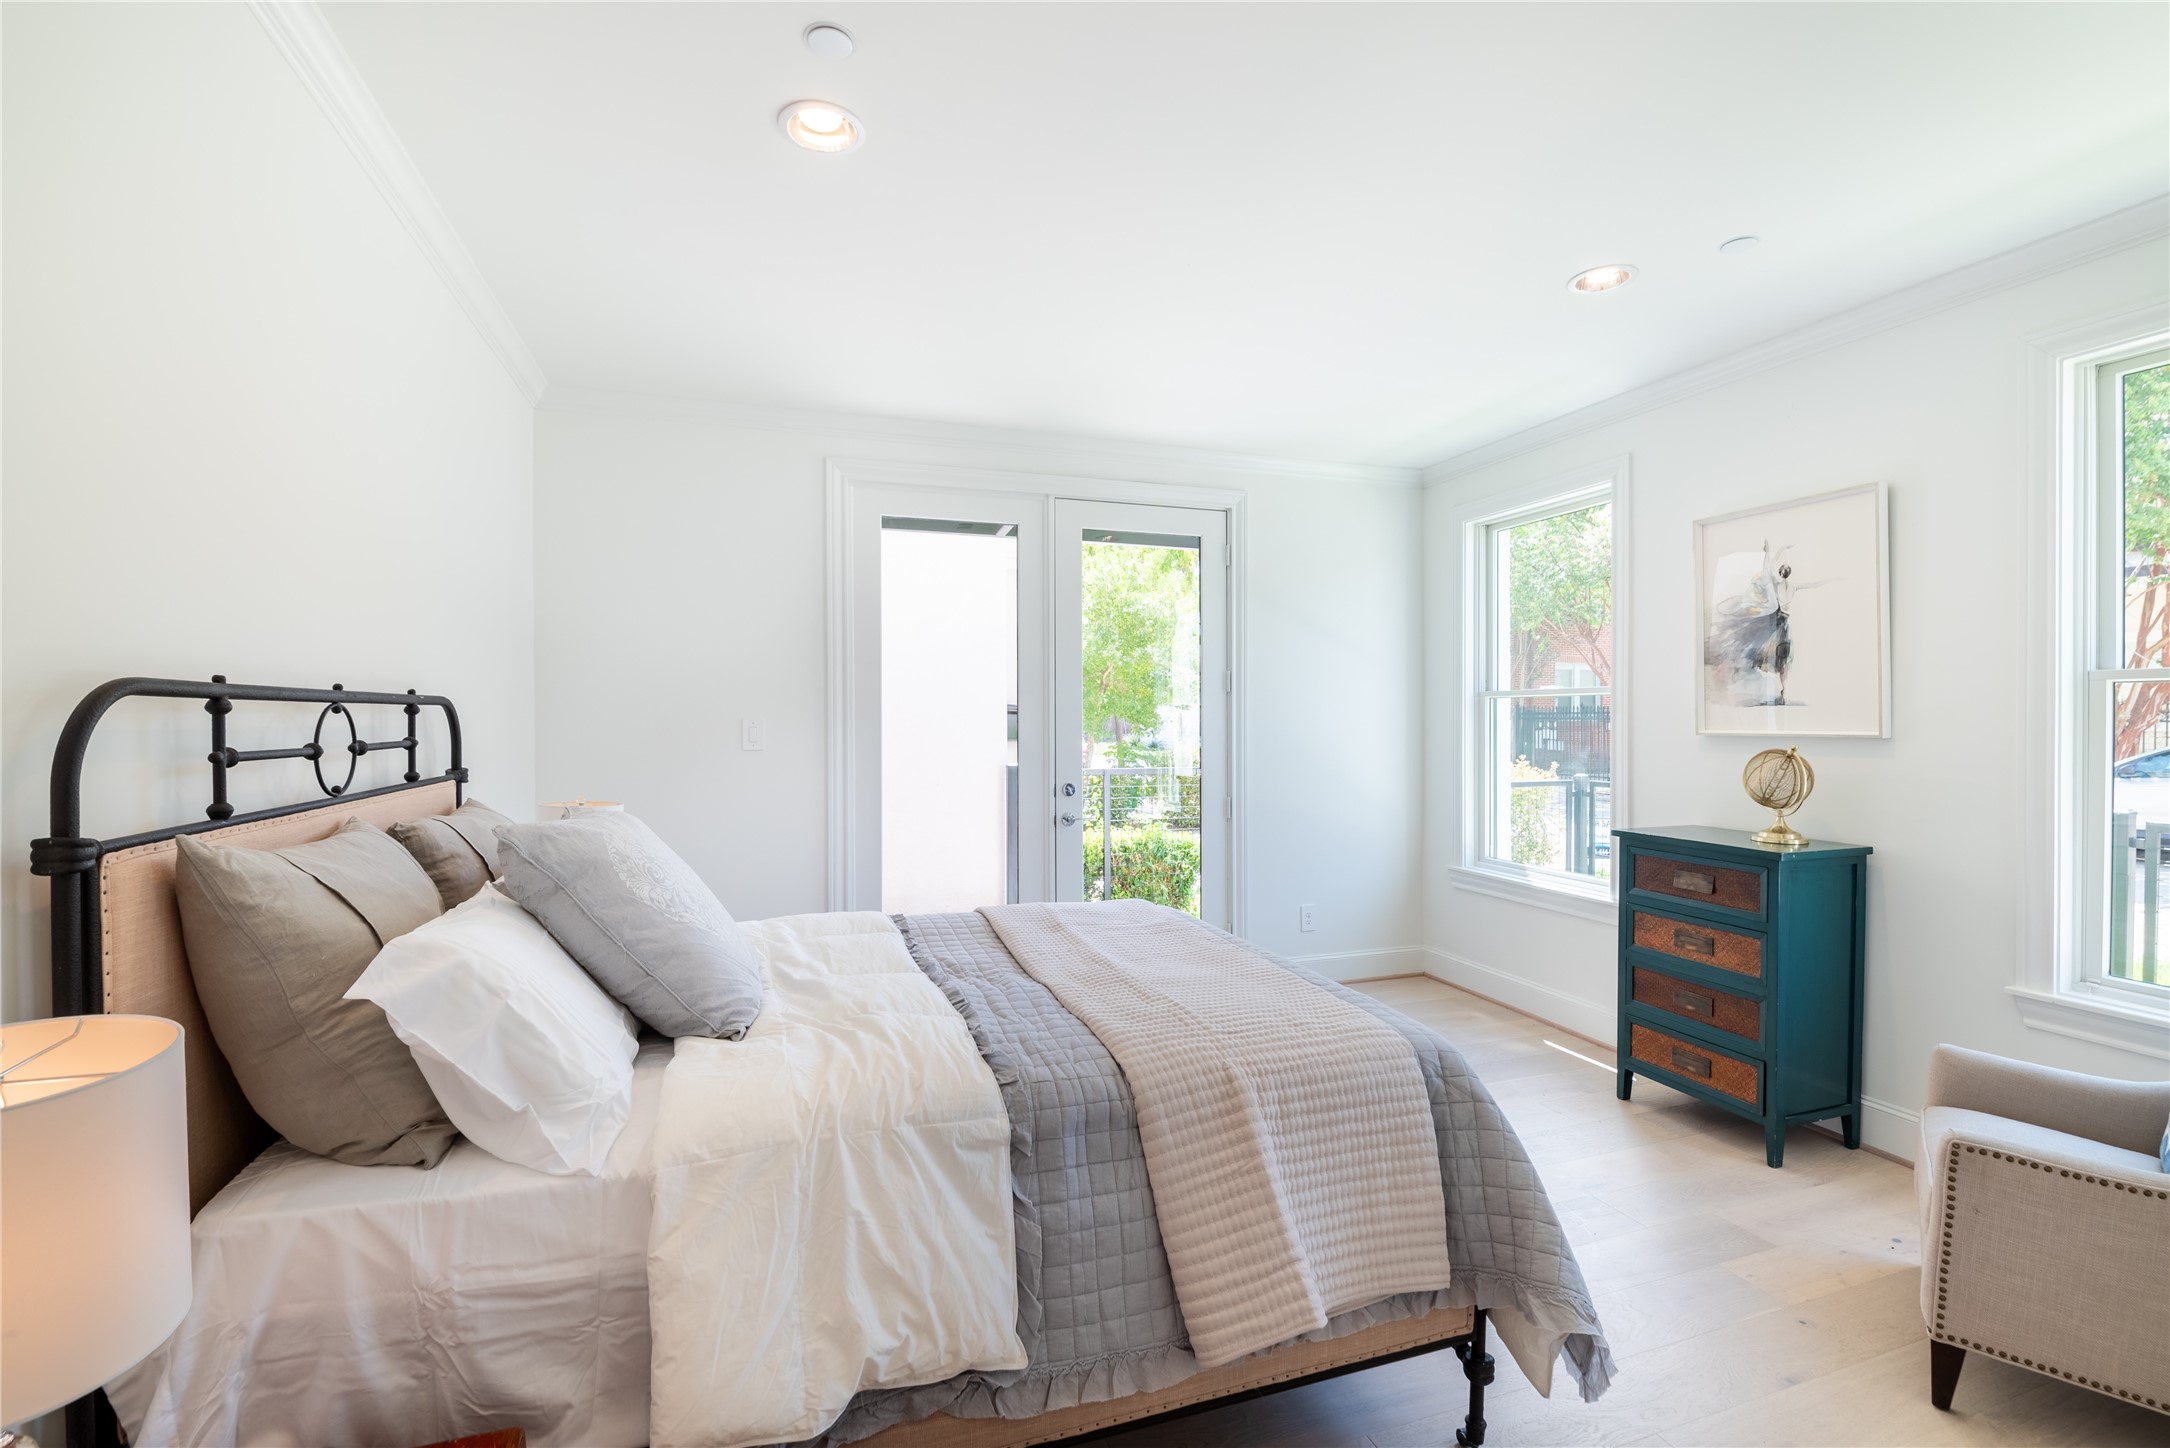 1st floor bedroom retreat leading out to the yard space.  Super for a study/ home office too!